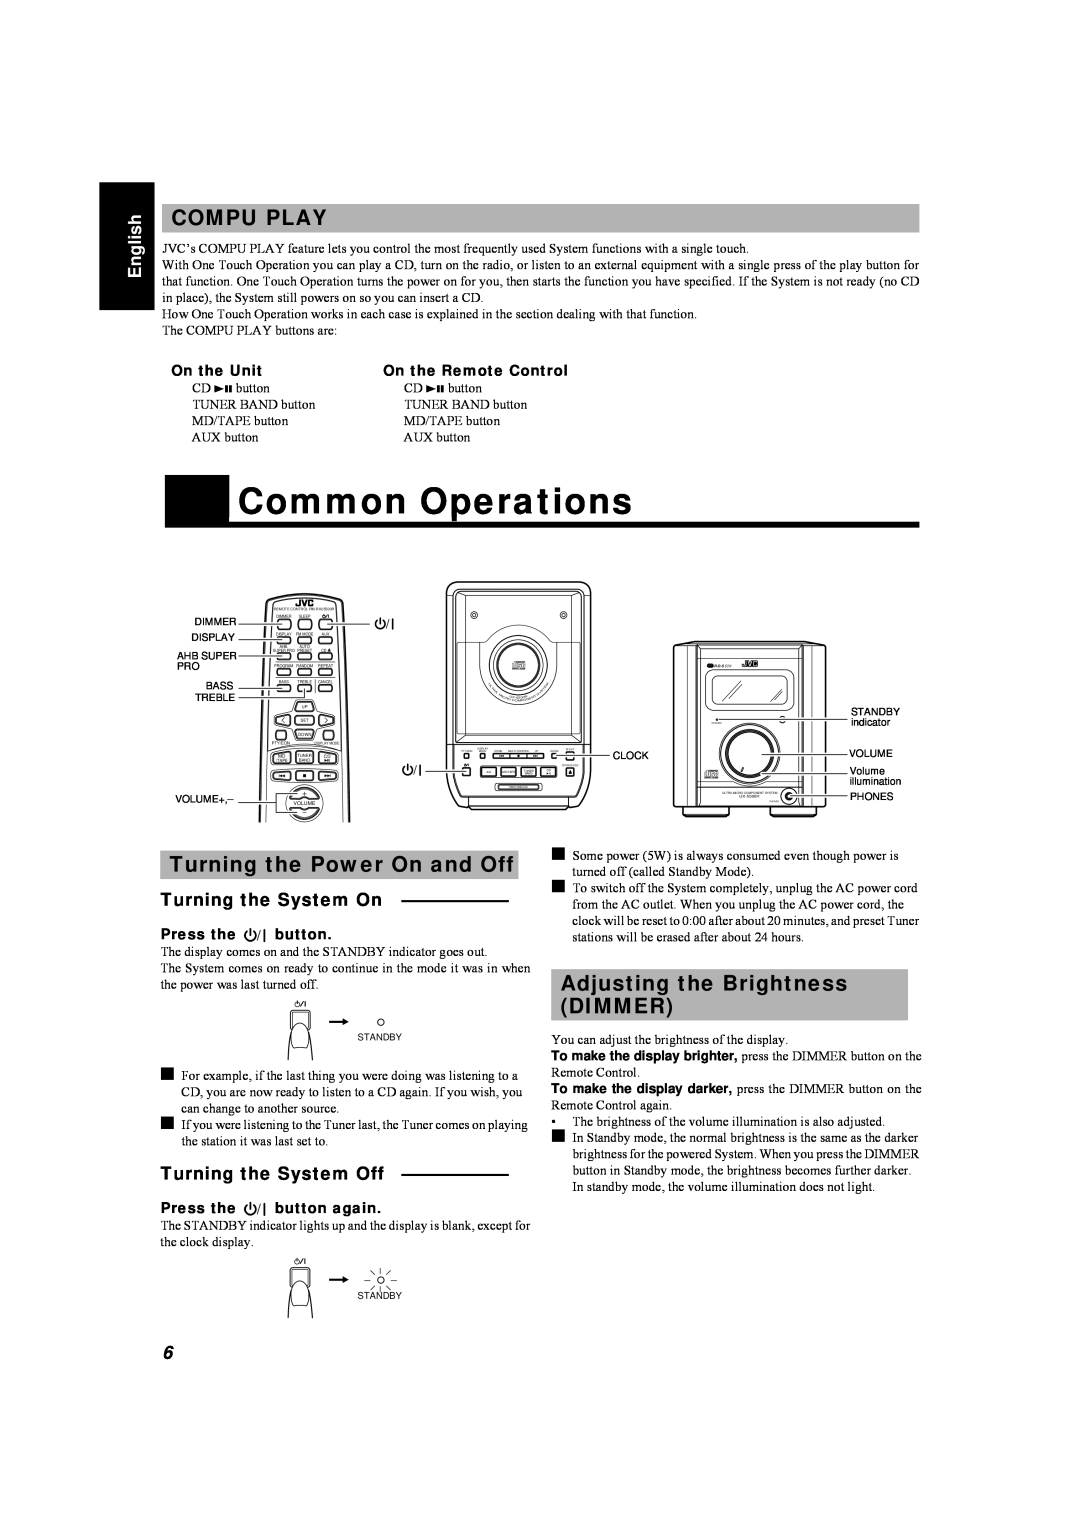 JVC LVT0084-001A Common Operations, Compu Play, Turning the Power On and Off, Adjusting the Brightness DIMMER, English 